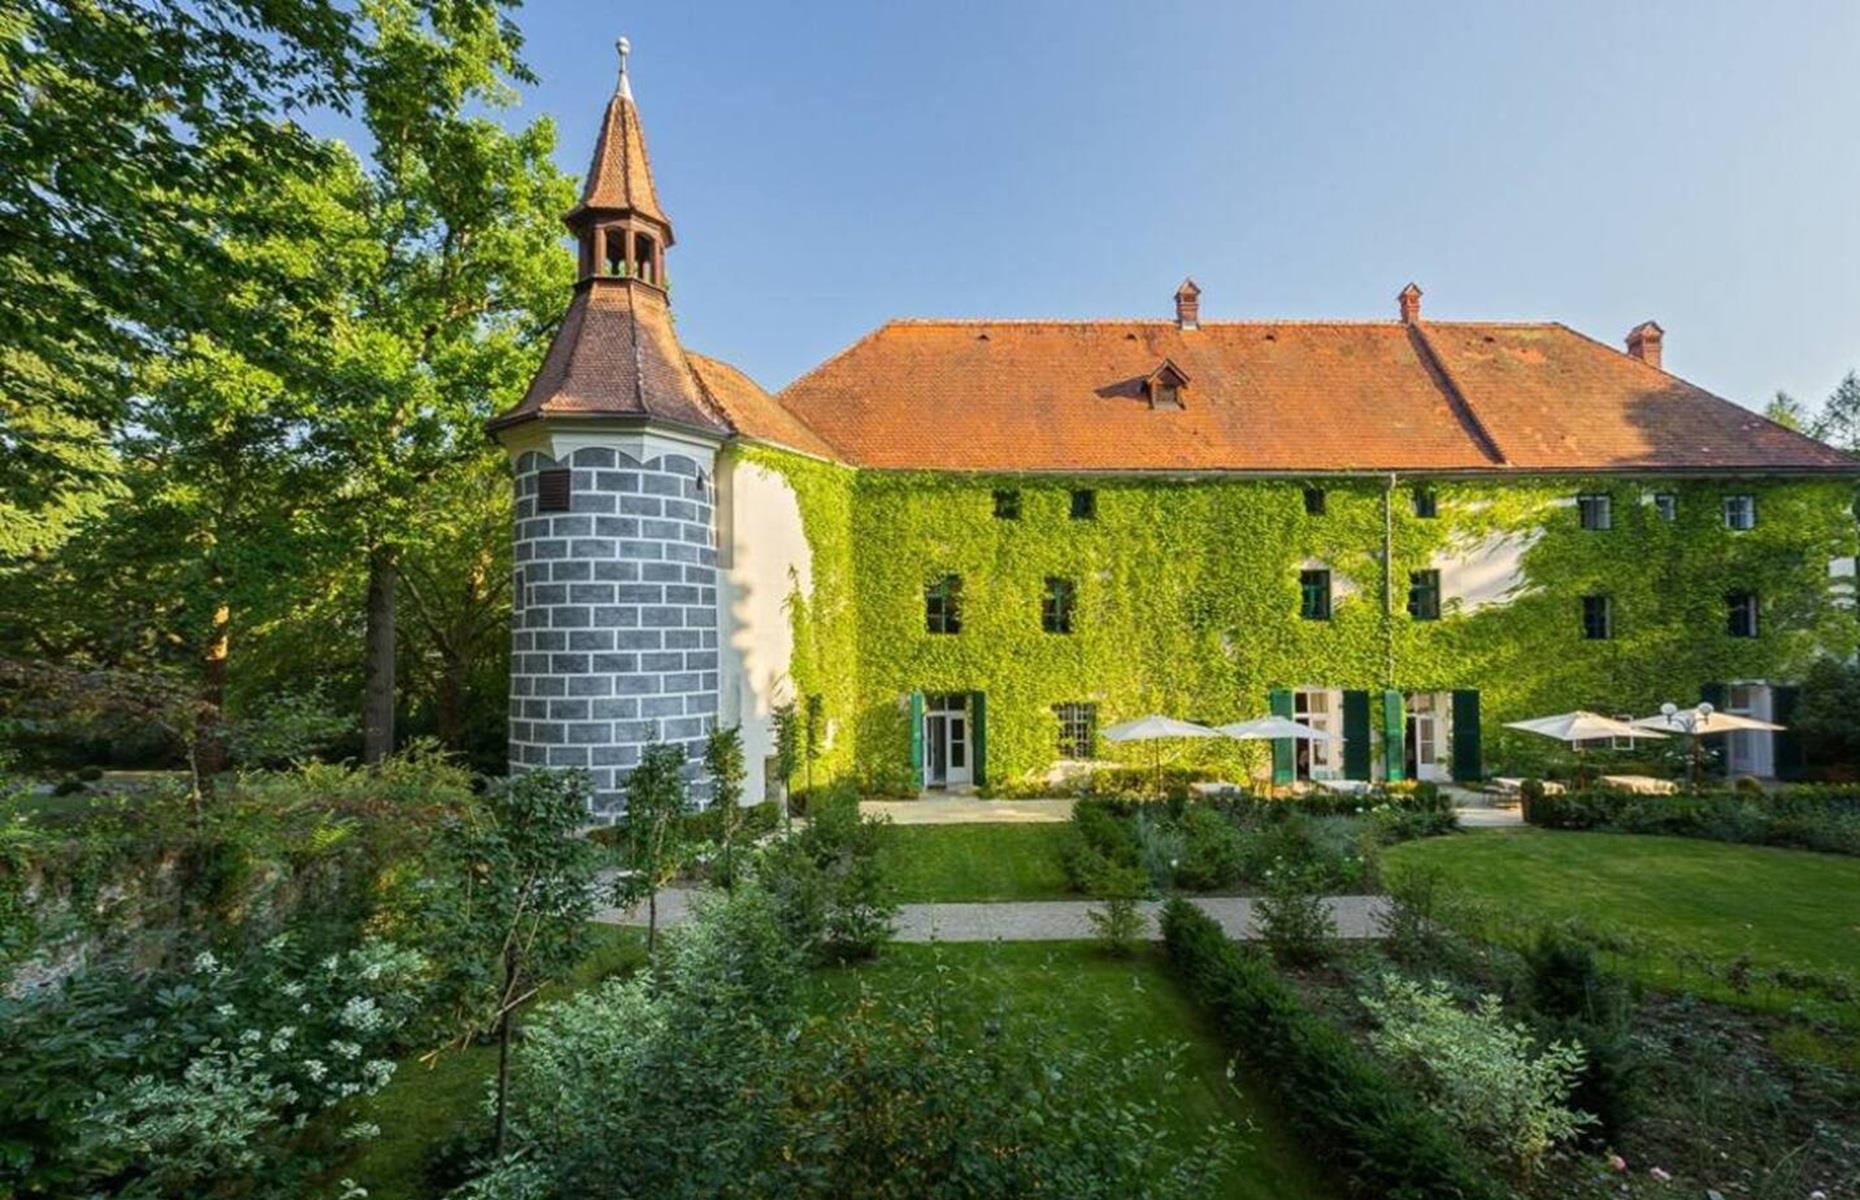 <p>About as romantic as castles get, <a href="https://www.schlossernegg.at/en/">Schloss Ernegg</a> is ideally located in the heart of Austria and is over 1,000 years old. It was first documented in 979 when Otto II, a Holy Roman Emperor, gave the land between the two Erlauf rivers to Bishop Wolfgang von Regensburg.</p>  <p>In 1524, Wolfgang von Oed, Emperor Ferdinand I’s cup bearer, bought the castle and his crest can still be found above the tower's entrance.</p>